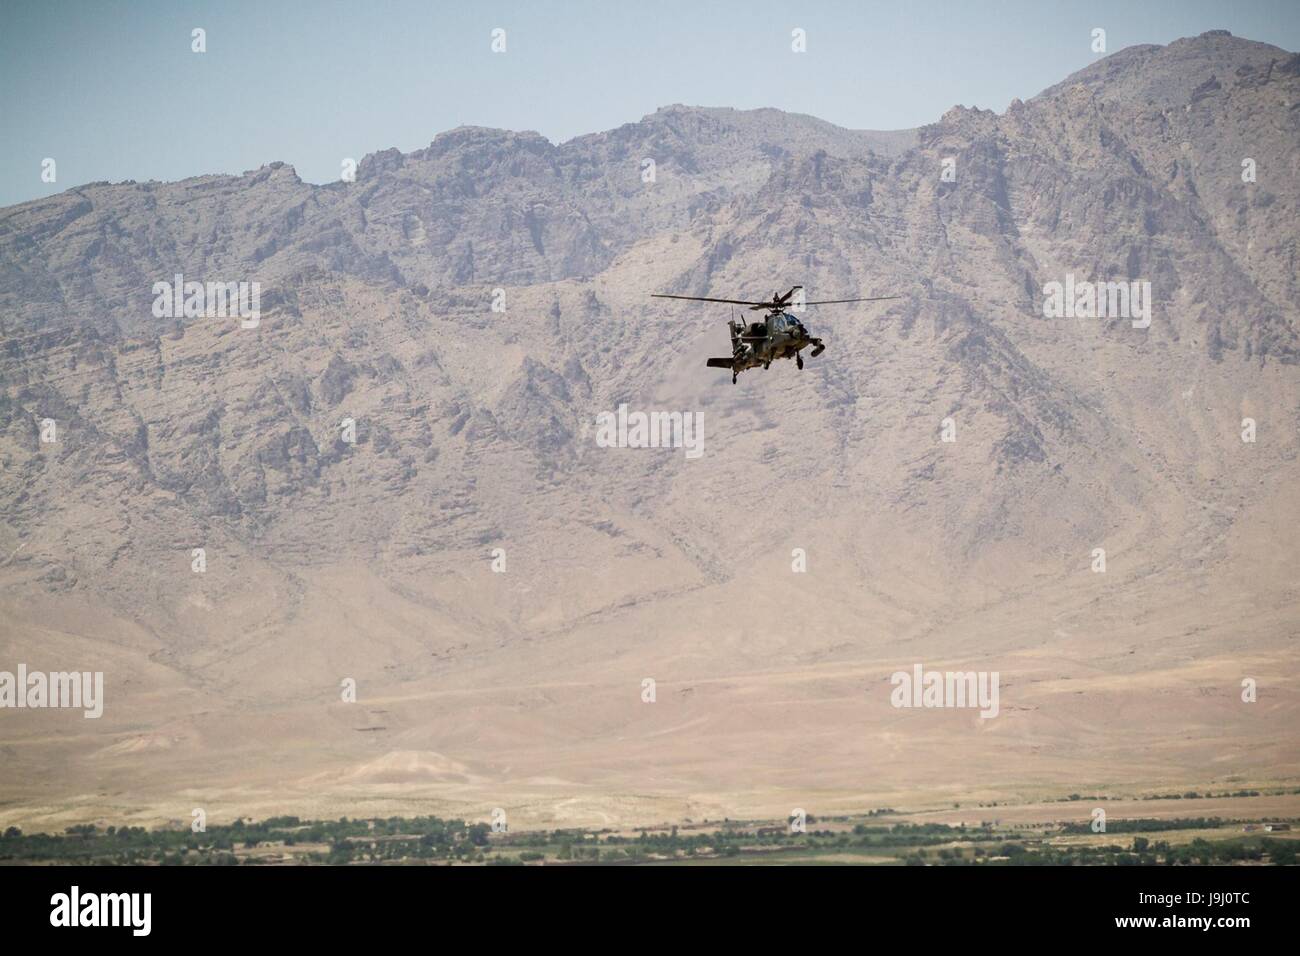 A U.S. Army AH-64 Apache helicopter assigned to Task Force Griffin, 16th Combat Aviation Brigade, during a mission in support of Operation Resolute Support May 1, 2017 in Uruzgan Province, Afghanistan. Kunduz has seen increased Taliban activity as more than 8,000 American troops and 6,000 from NATO and allied countries continue to assist the government. Stock Photo